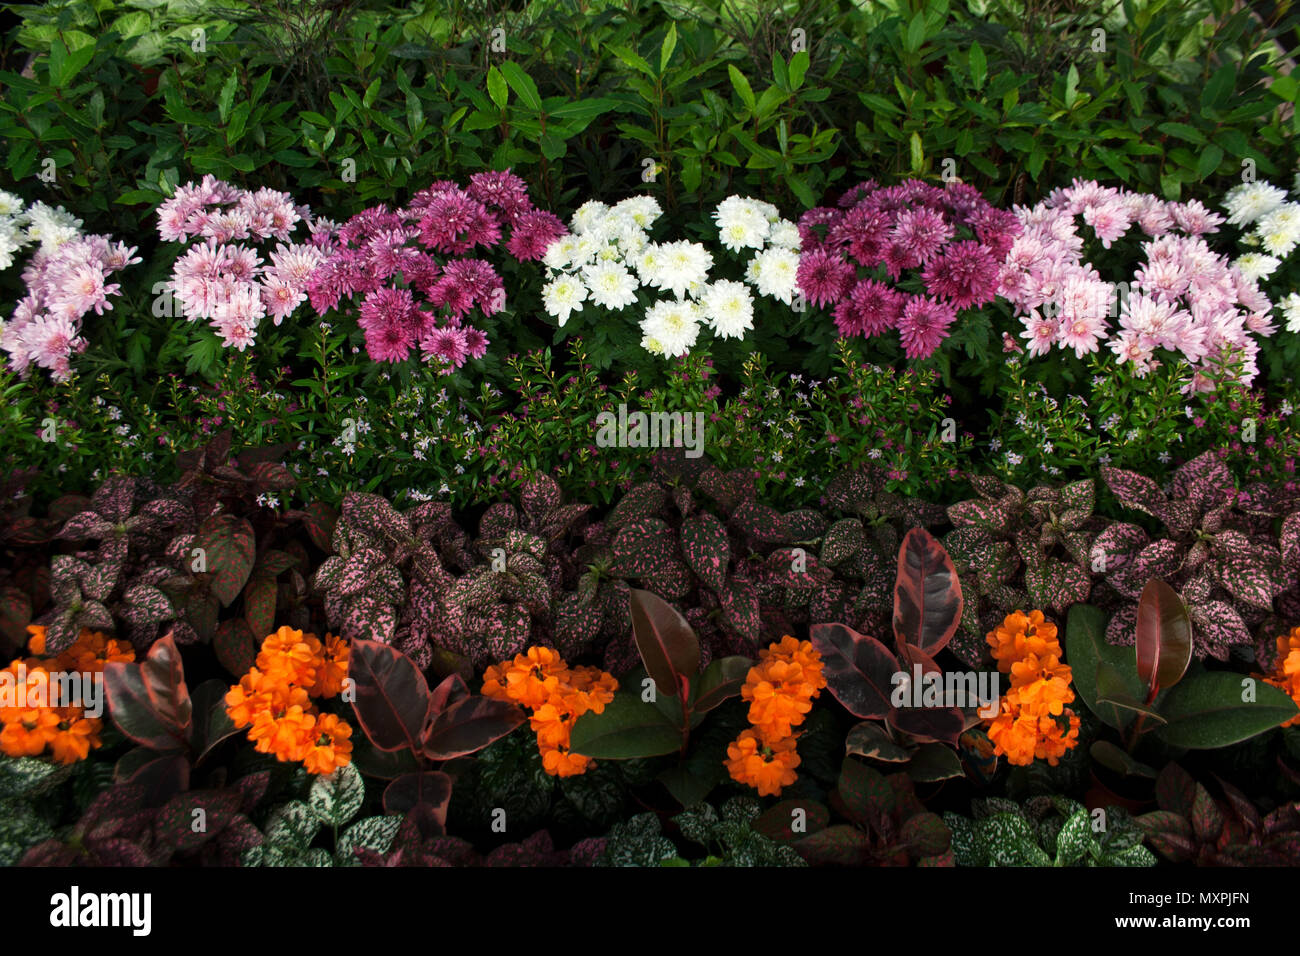 Aster flowers, fittonia and other garden plants from a high angle view Stock Photo